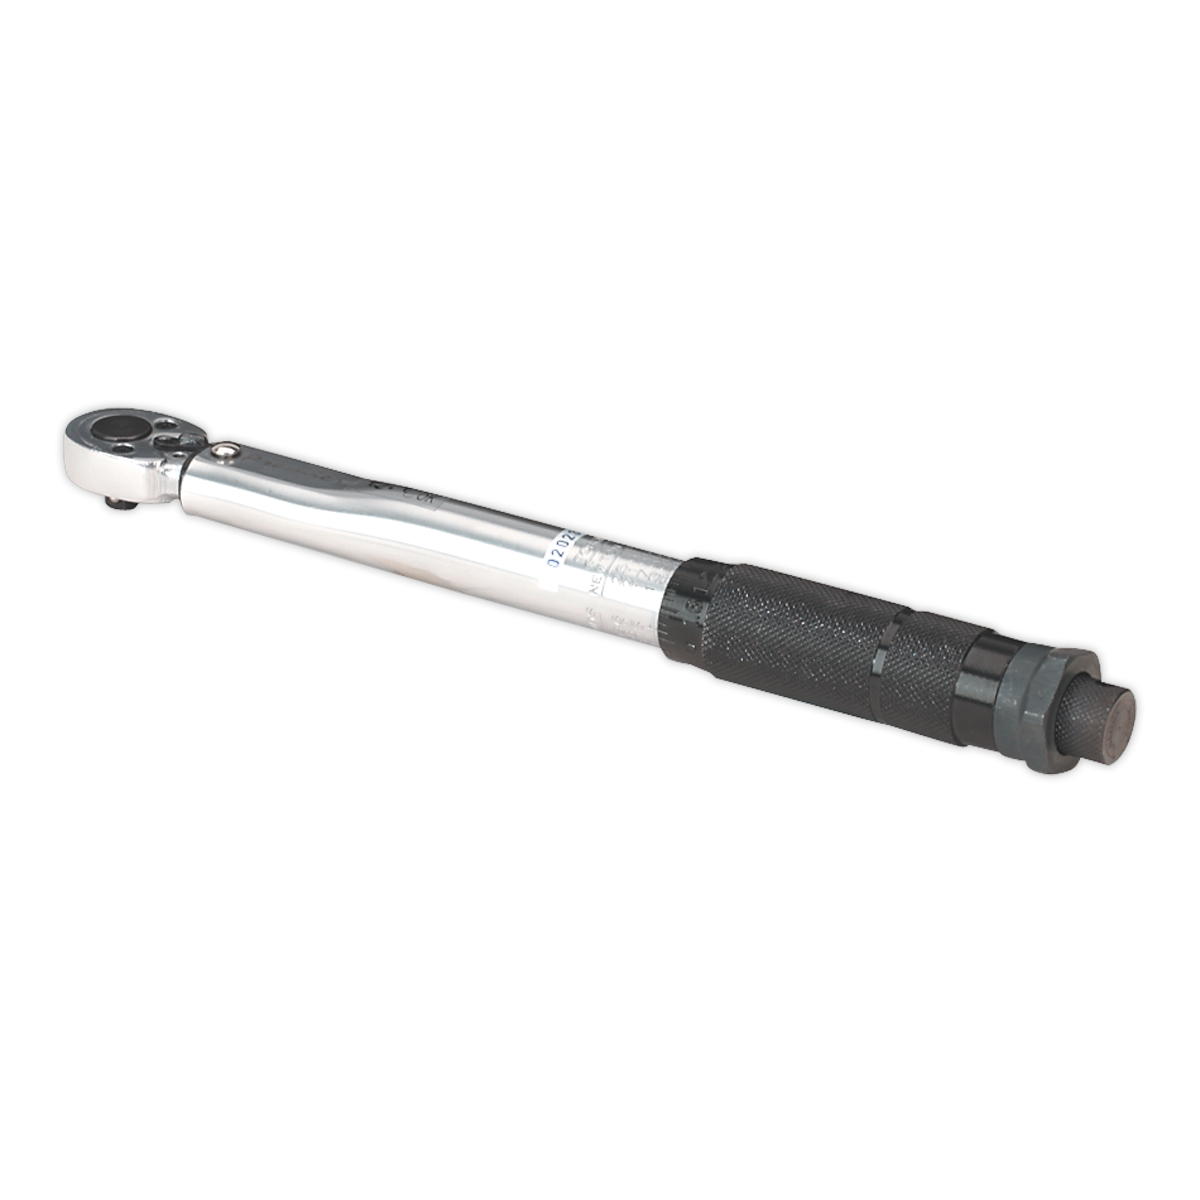 Torque Wrench Micrometer Style 1/4"Sq Drive 5-25Nm(44-221lb.in) - Calibrated - STW101 - Farming Parts